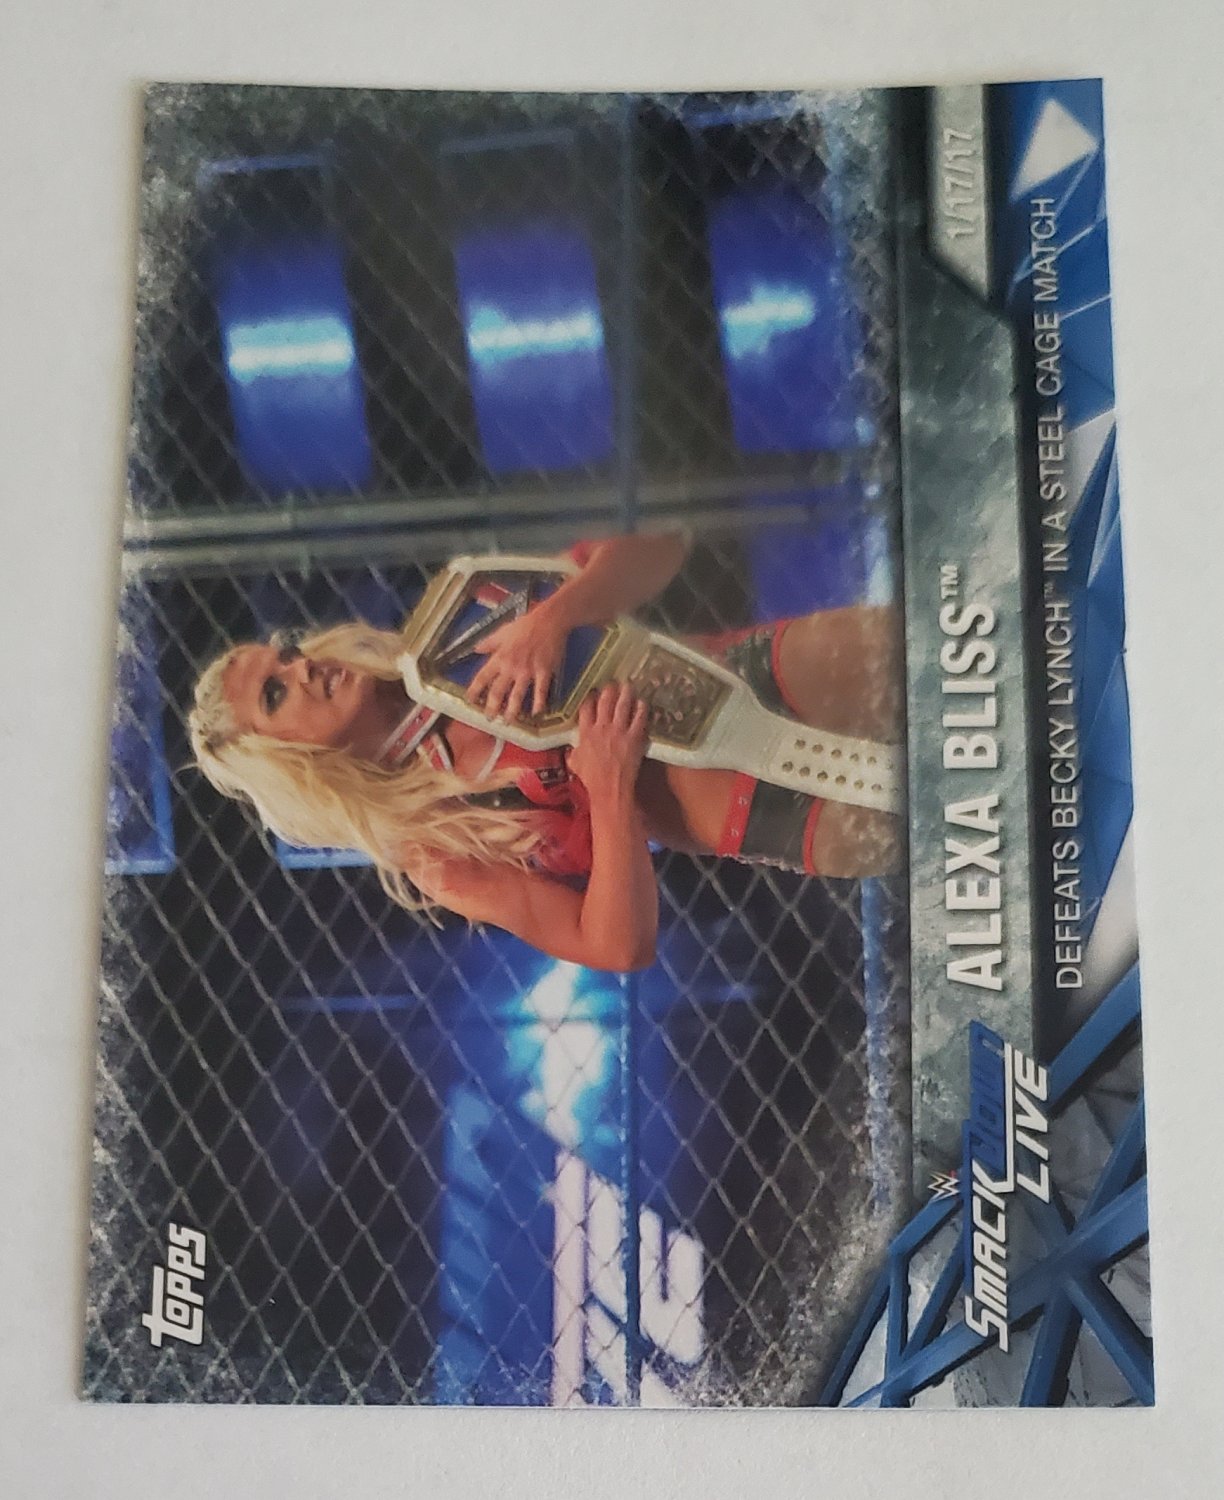 Alexa Bliss 2017 Topps WWE Womens Division WWE Matches Moment Base Card